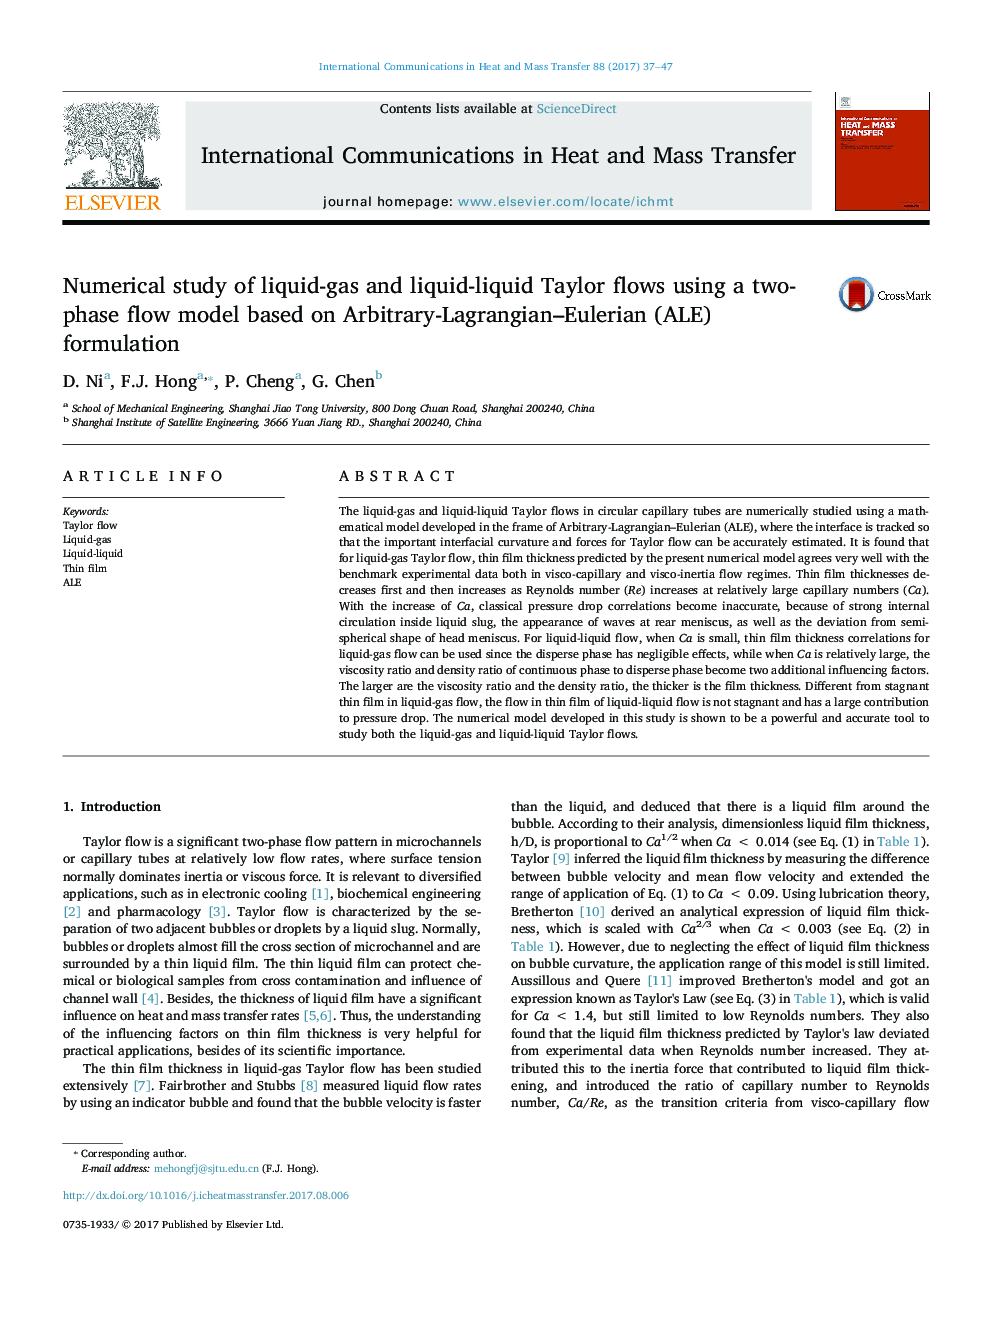 Numerical study of liquid-gas and liquid-liquid Taylor flows using a two-phase flow model based on Arbitrary-Lagrangian-Eulerian (ALE) formulation